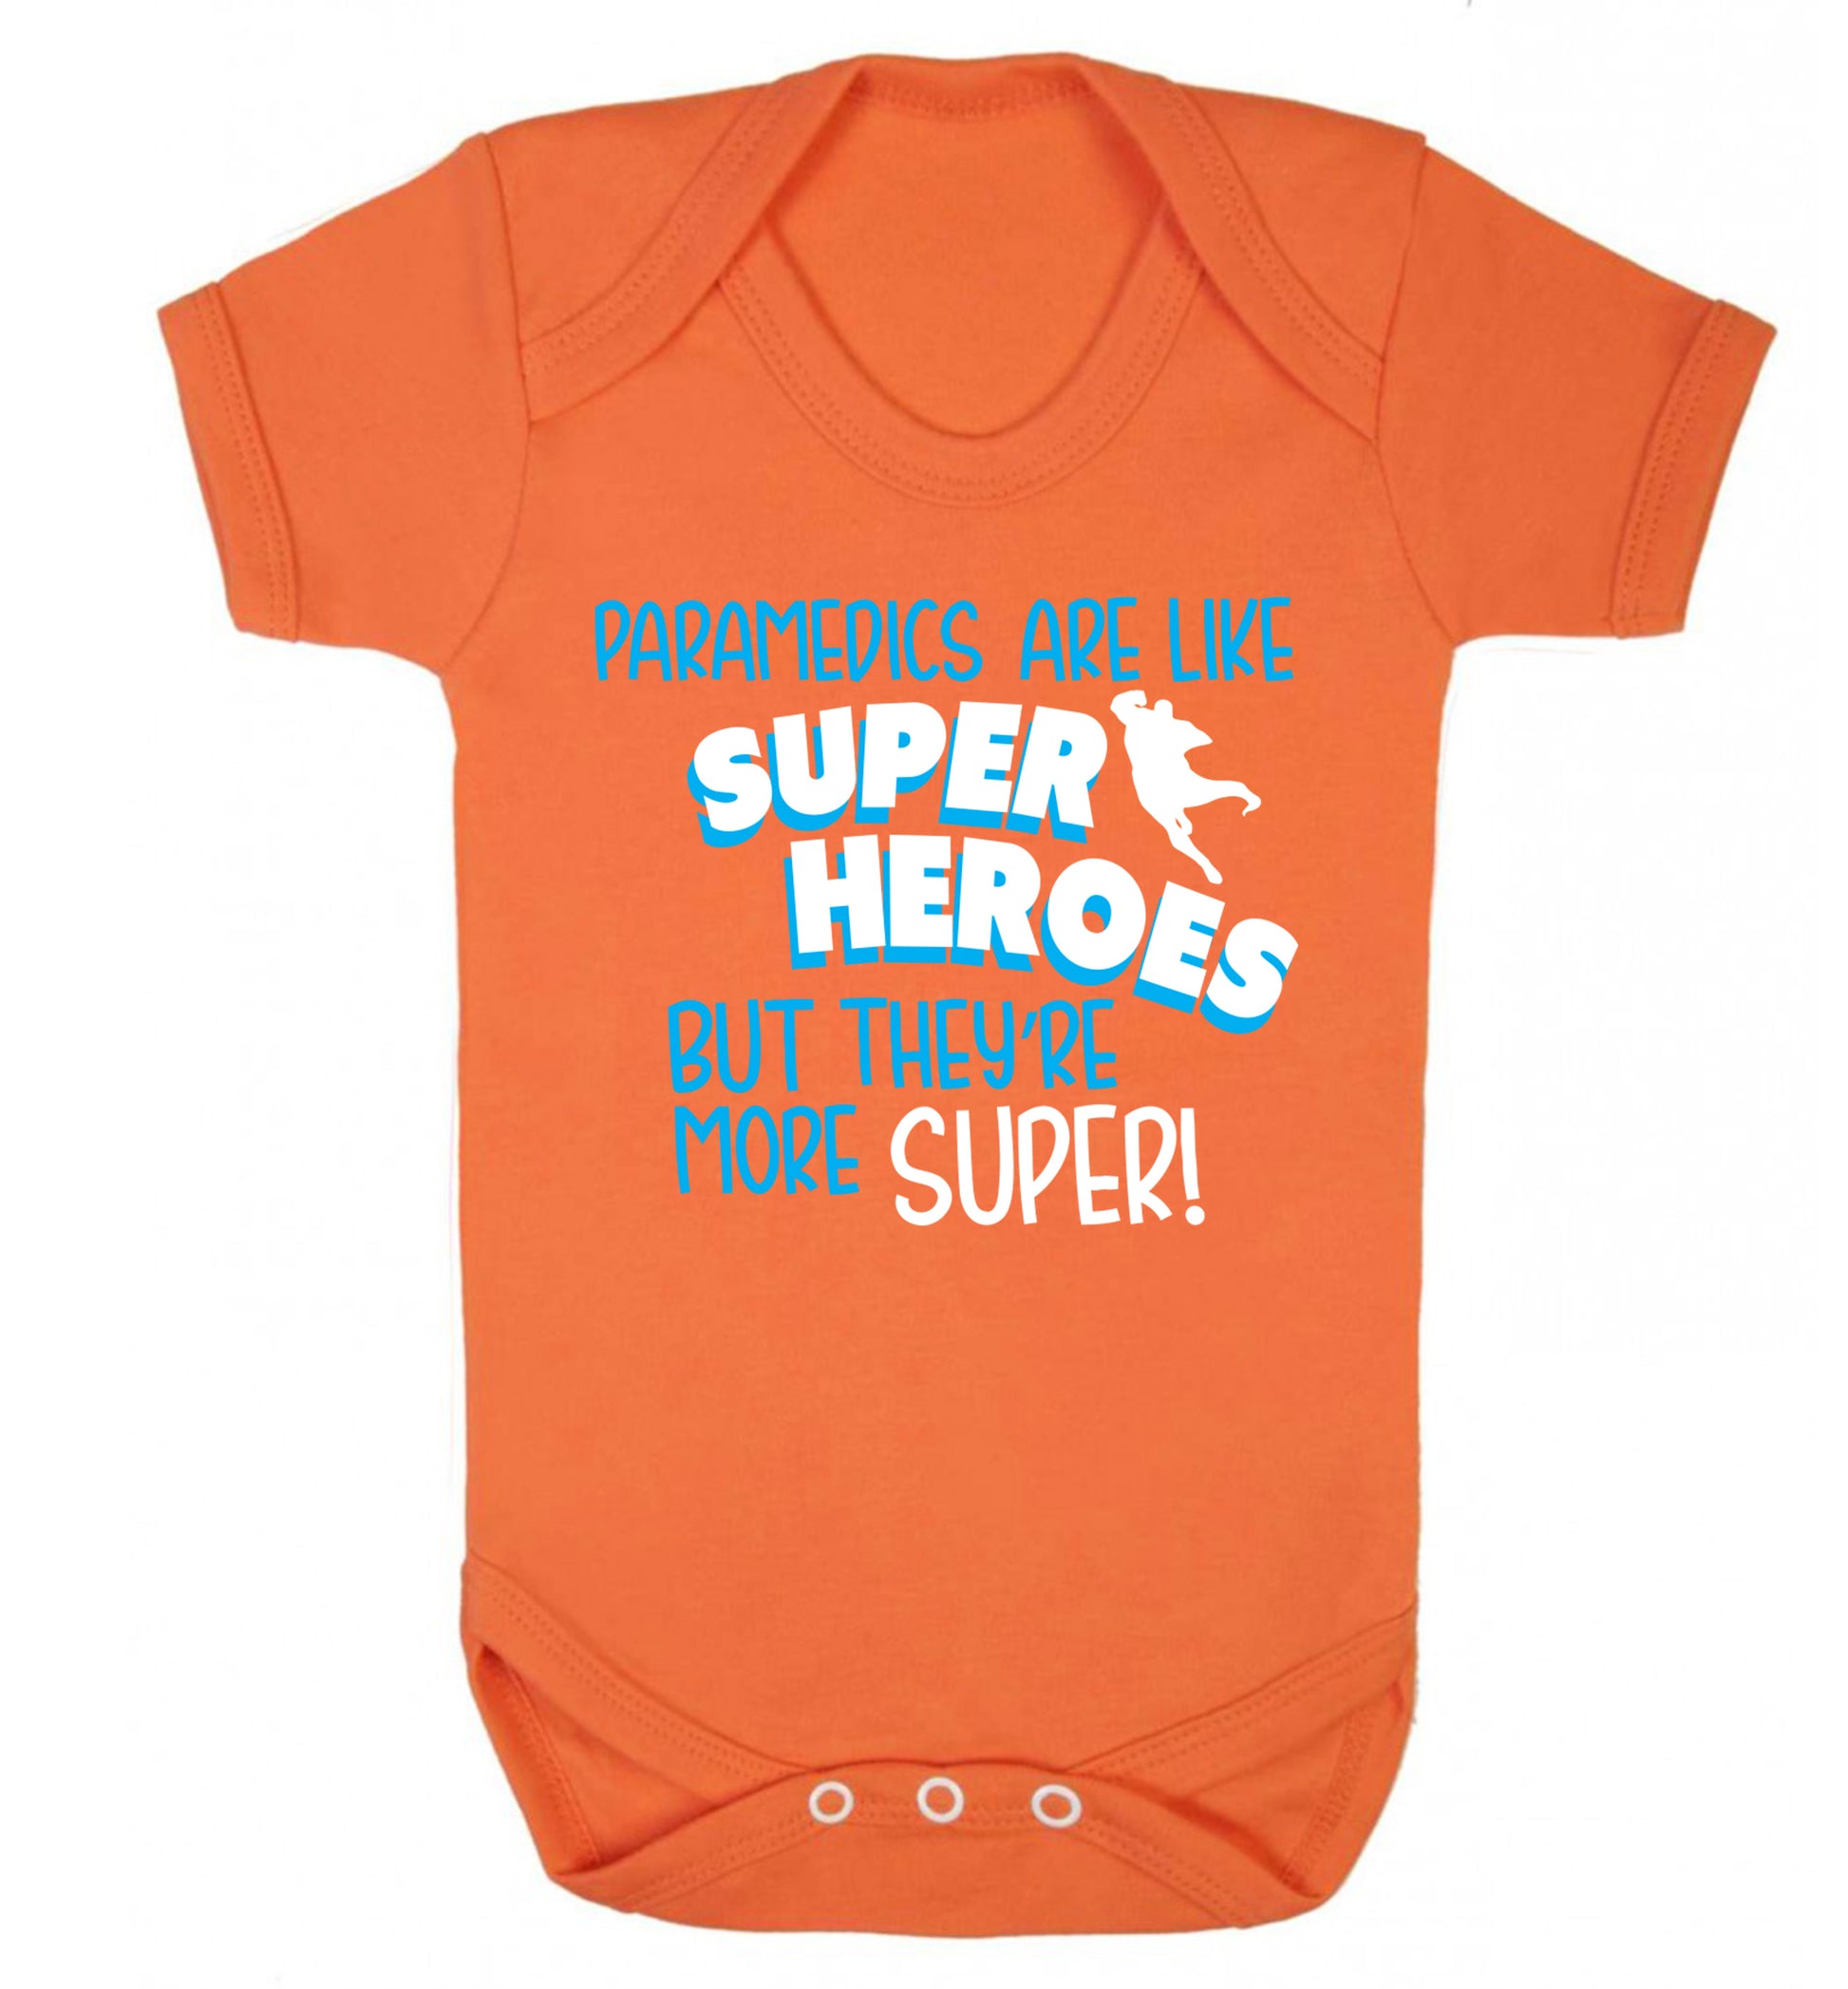 Paramedics are like superheros but they're more super Baby Vest orange 18-24 months